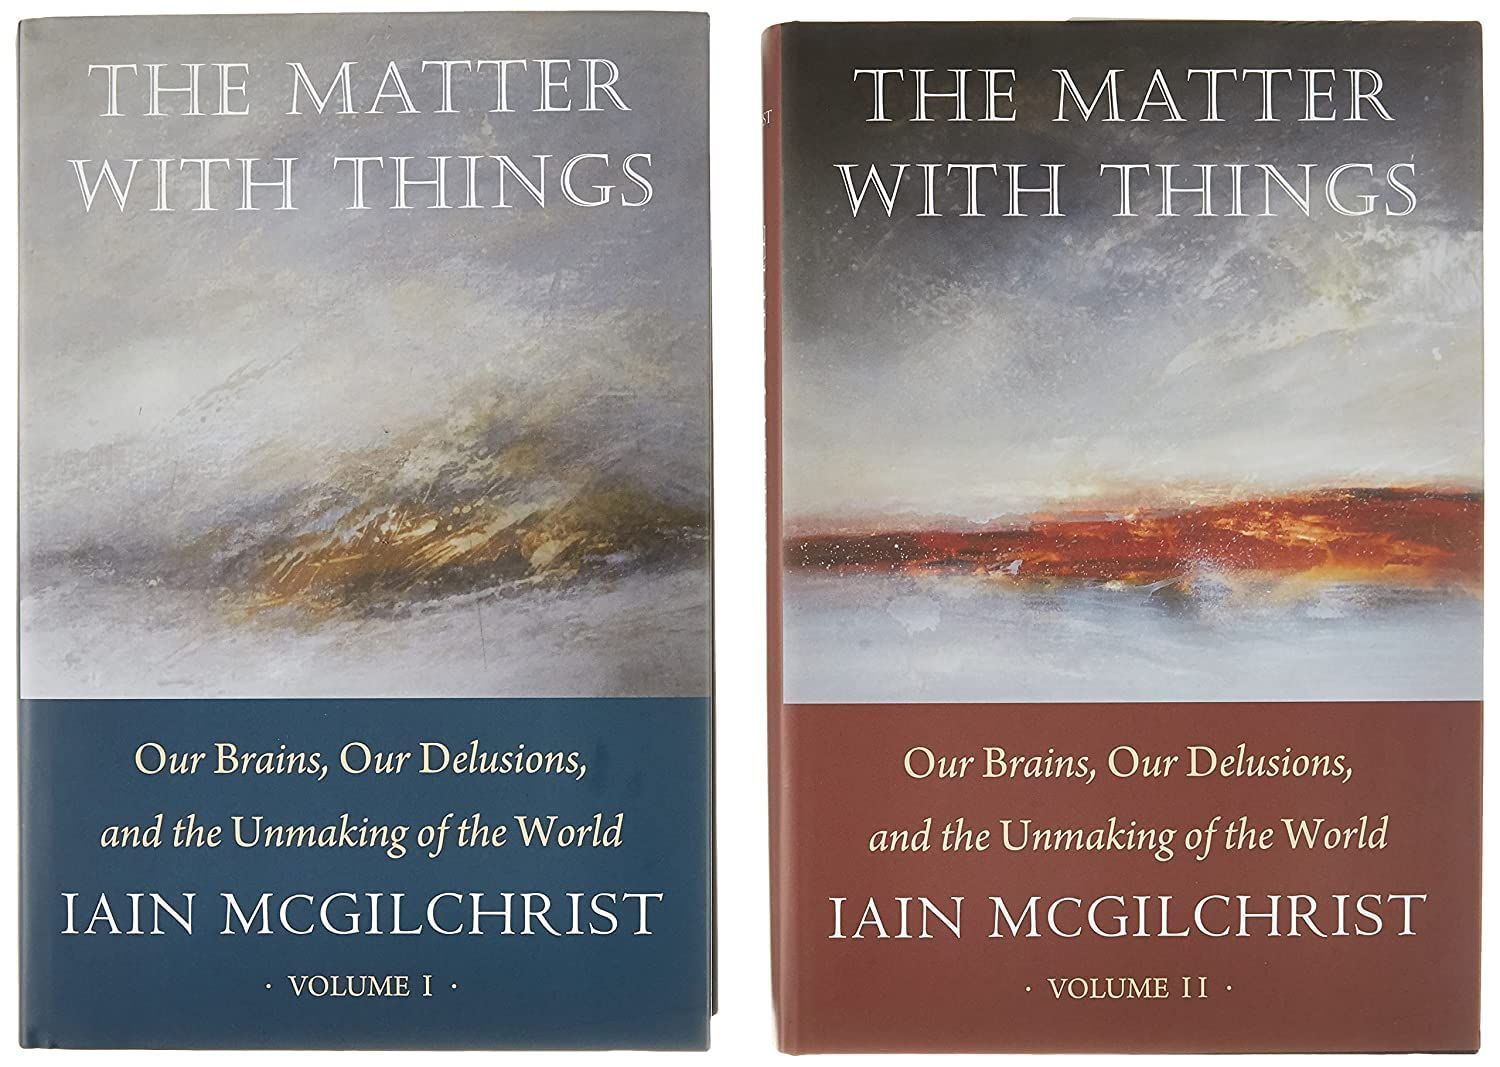 Beyond Our Delusions: On Iain McGilchrist’s “The Matter with Things”